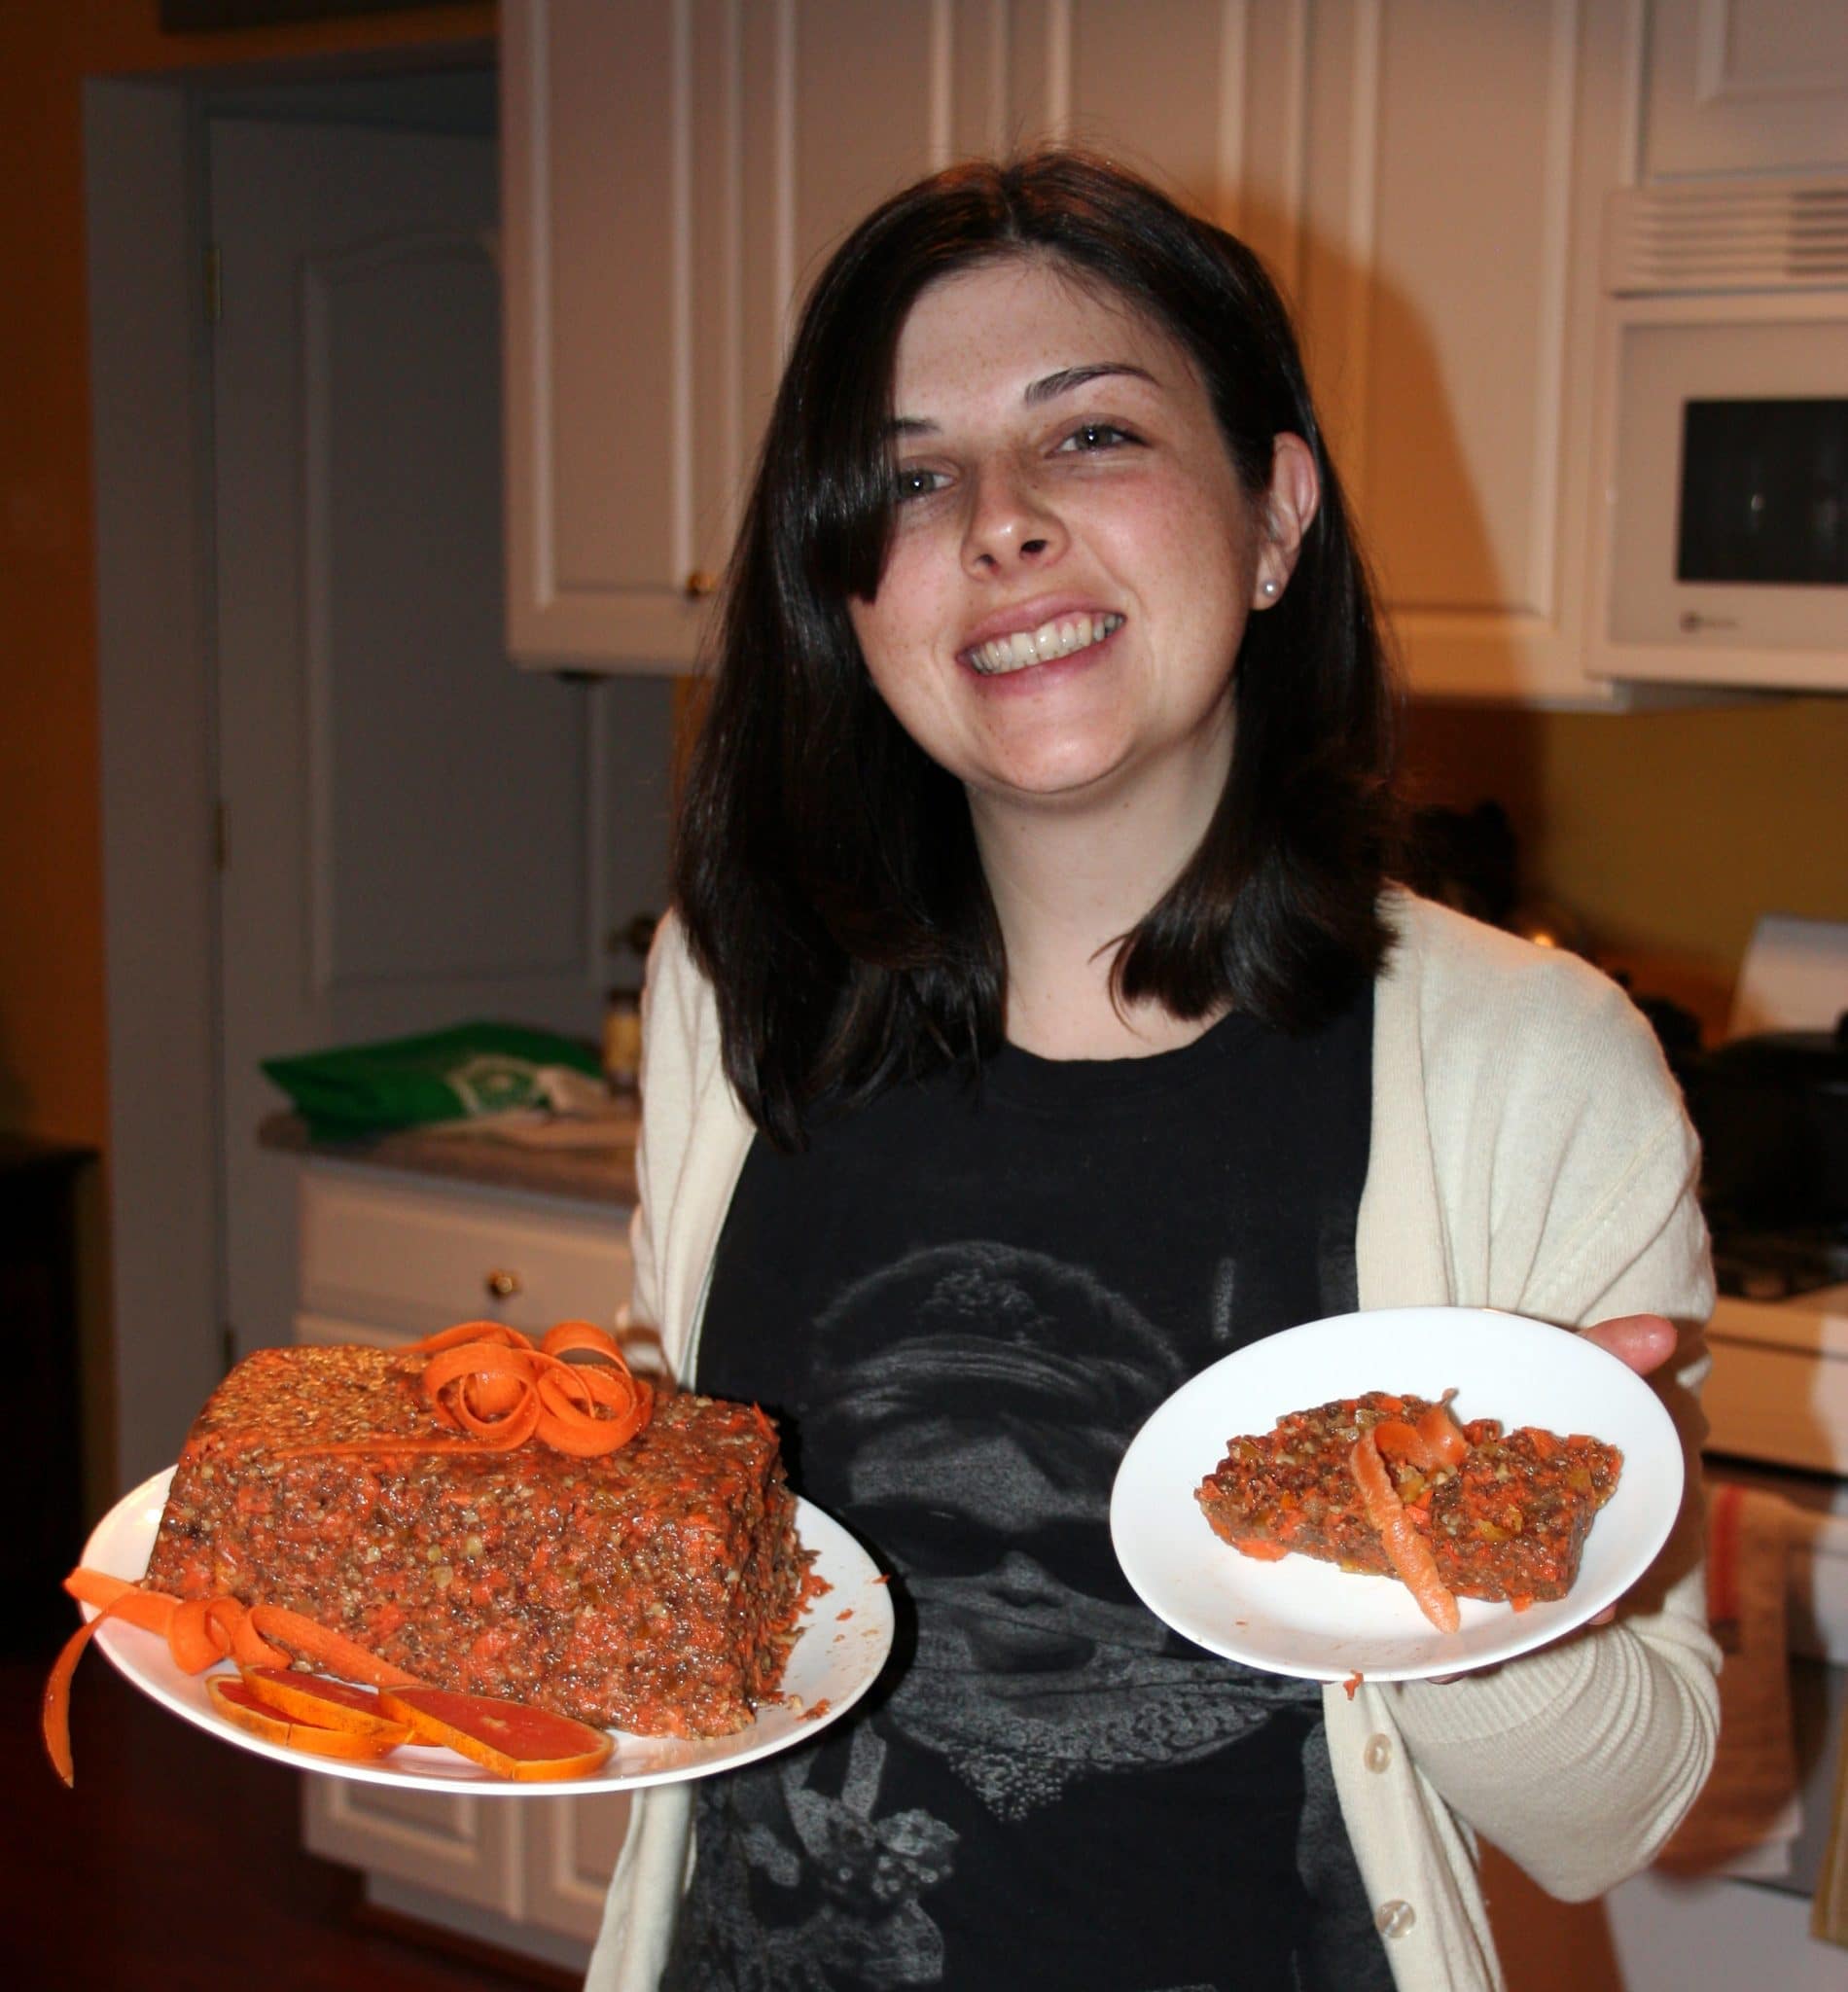 Christine holding Vegan Raw Chia-Carrot Cake in one hand, and a slice of carrot cake in the other